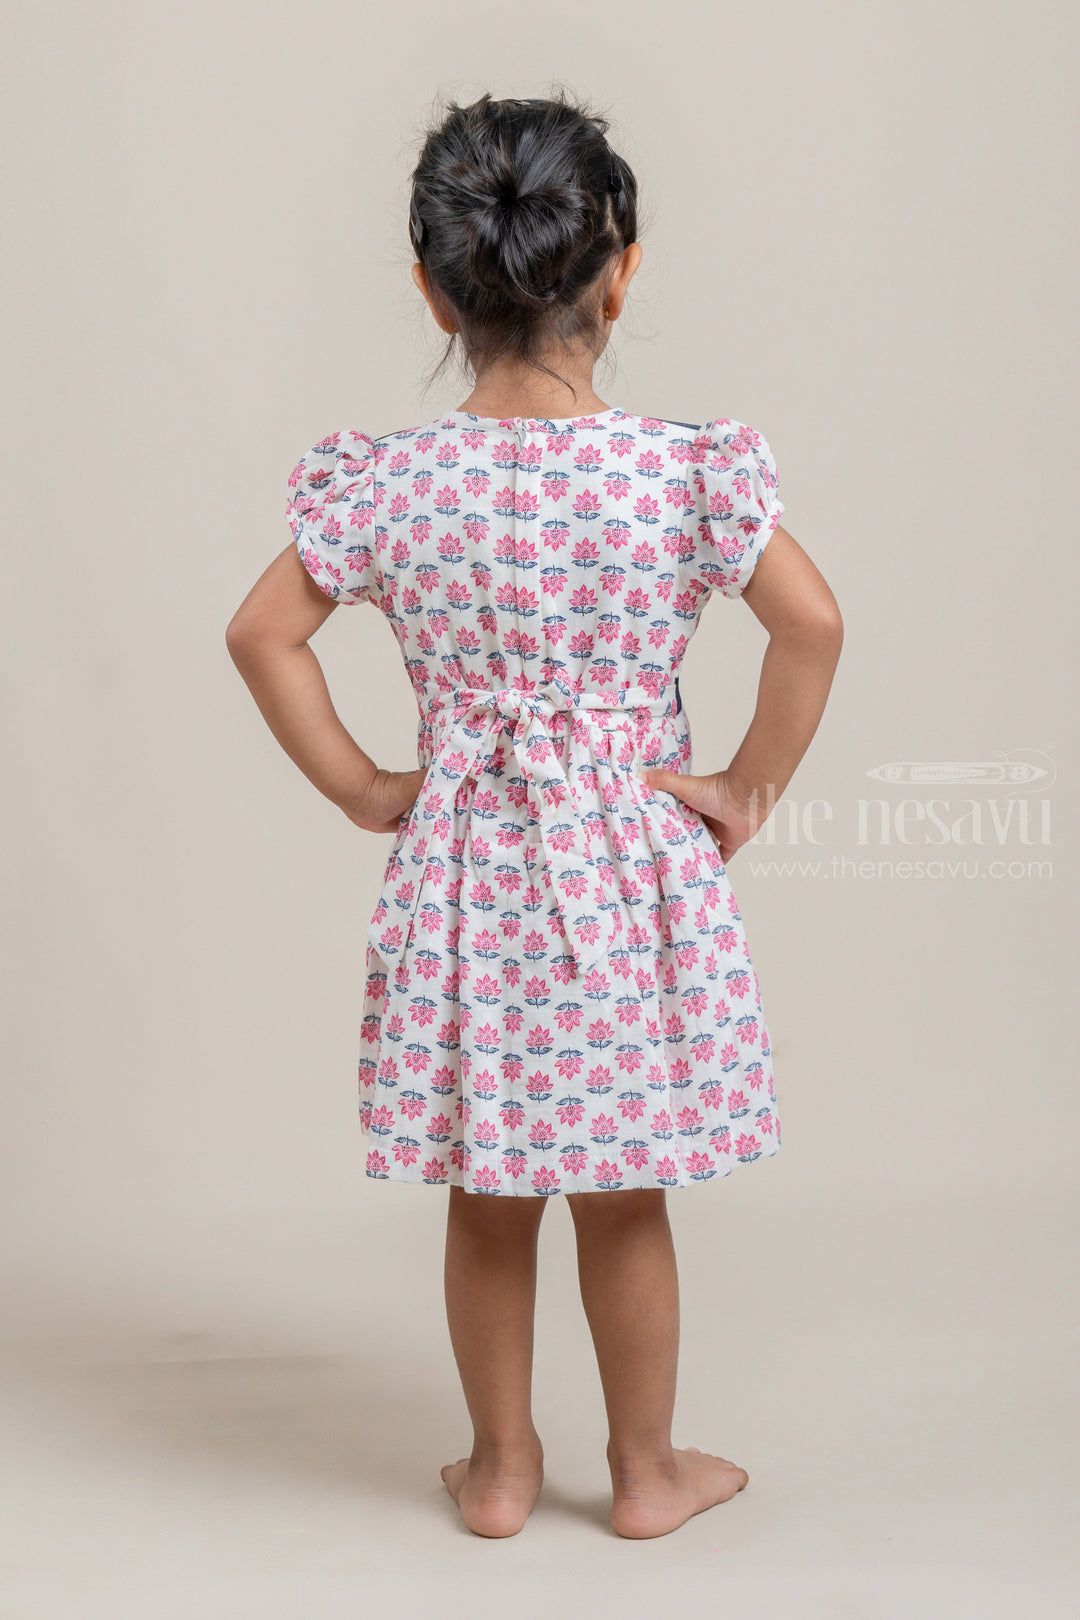 The Nesavu Baby Cotton Frocks Adorable Floral Print White Cotton Dress with Peter Pan Collar for Baby Girls Nesavu Adorable Floral Print White Cotton Dress with Peter Pan Collar | The Nesavu